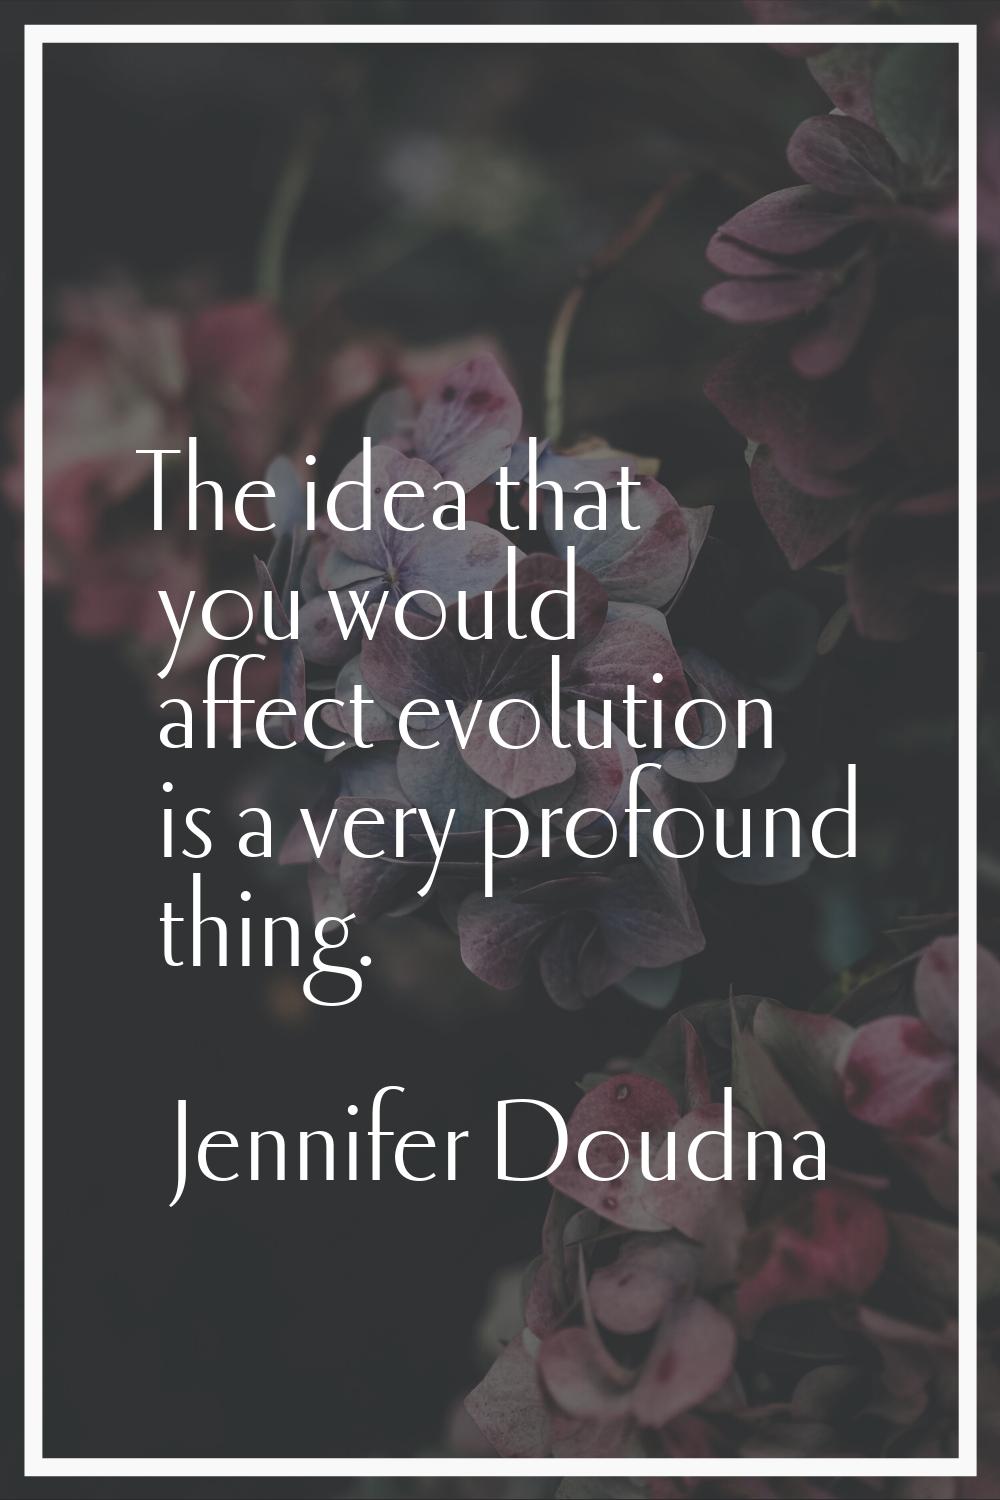 The idea that you would affect evolution is a very profound thing.